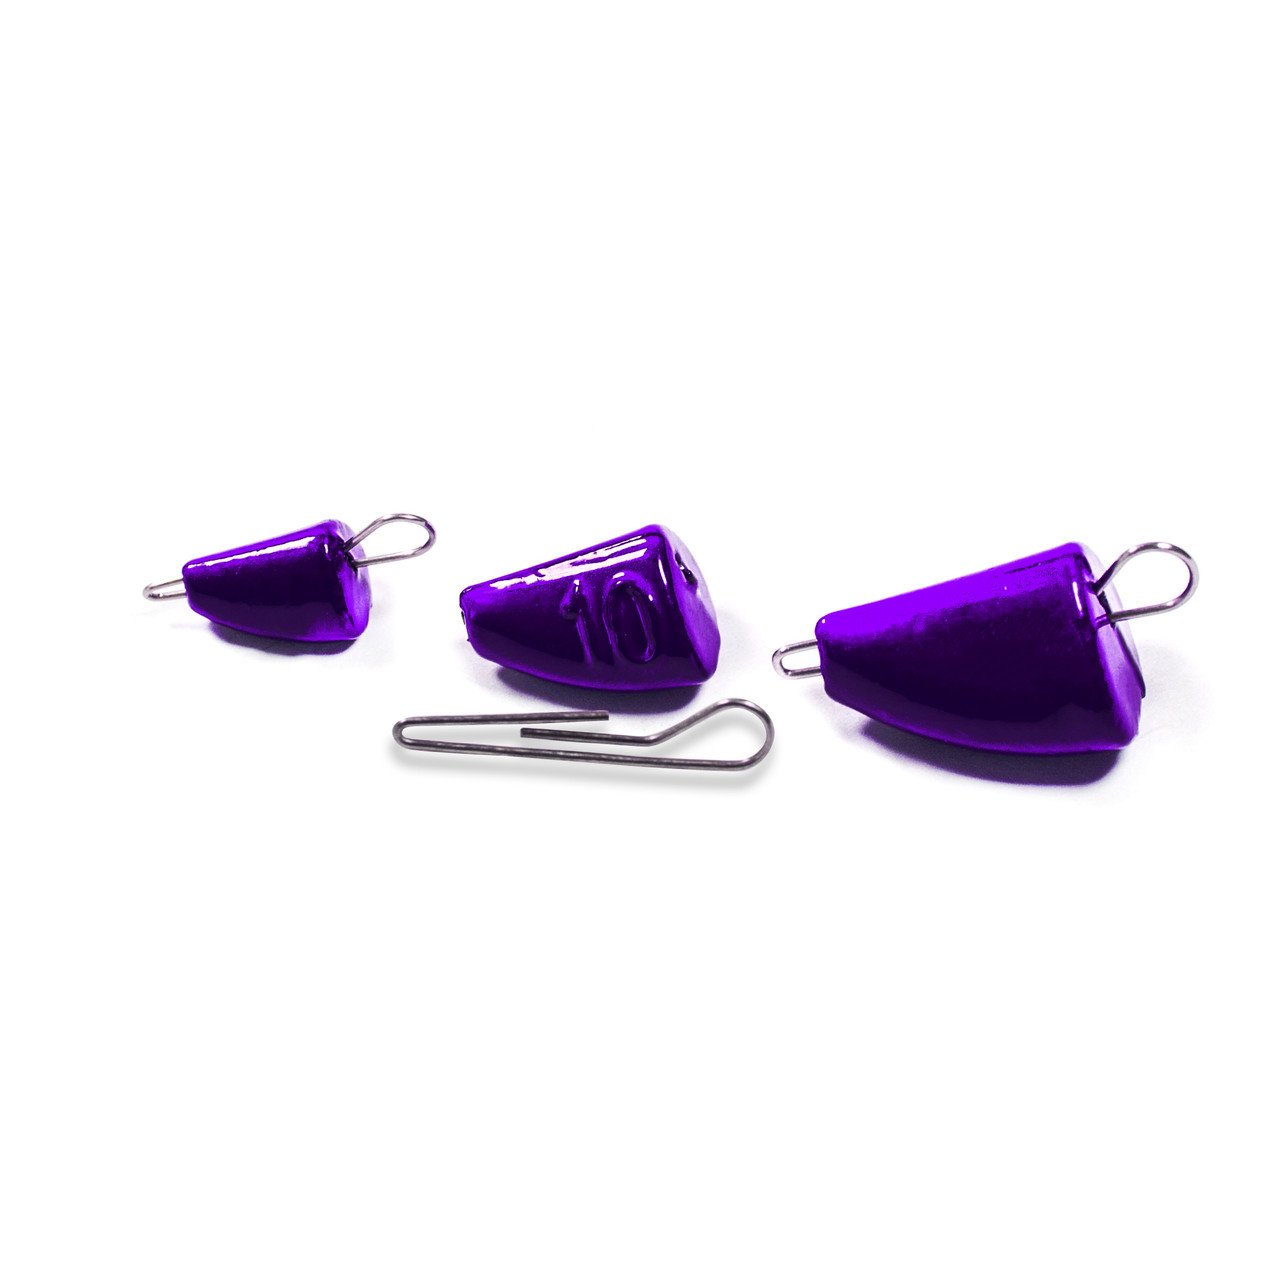 Leaded heads Active projectile Violets, movable staples - 10 pc